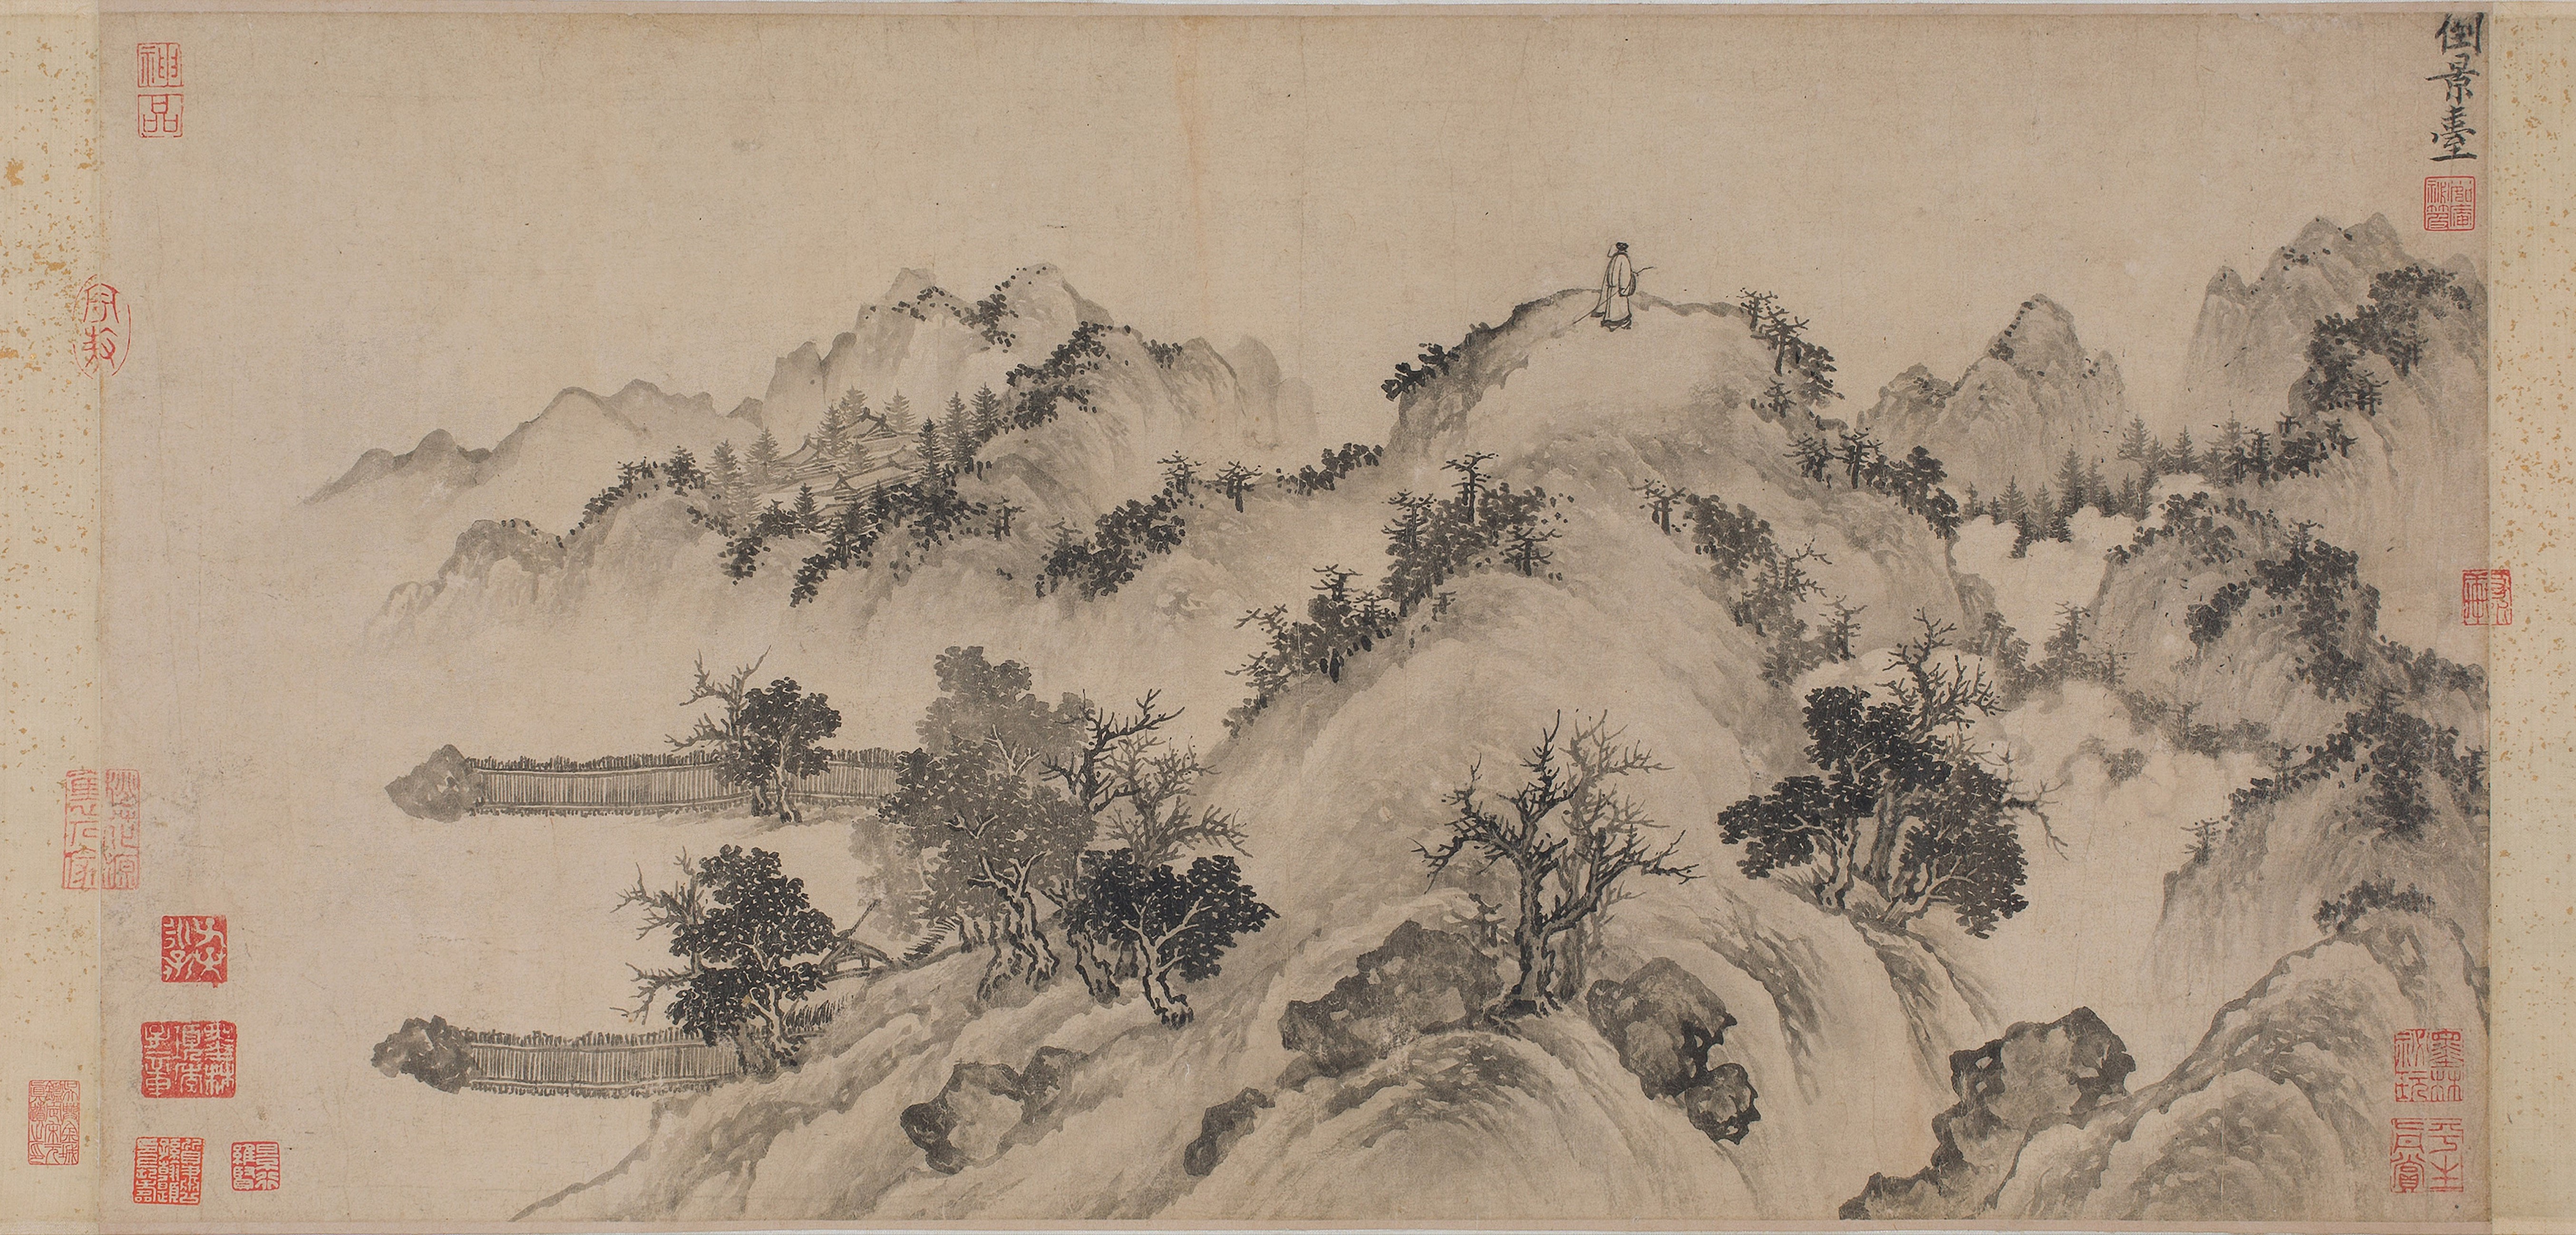 China Painting Chinese Culture 5417x2596